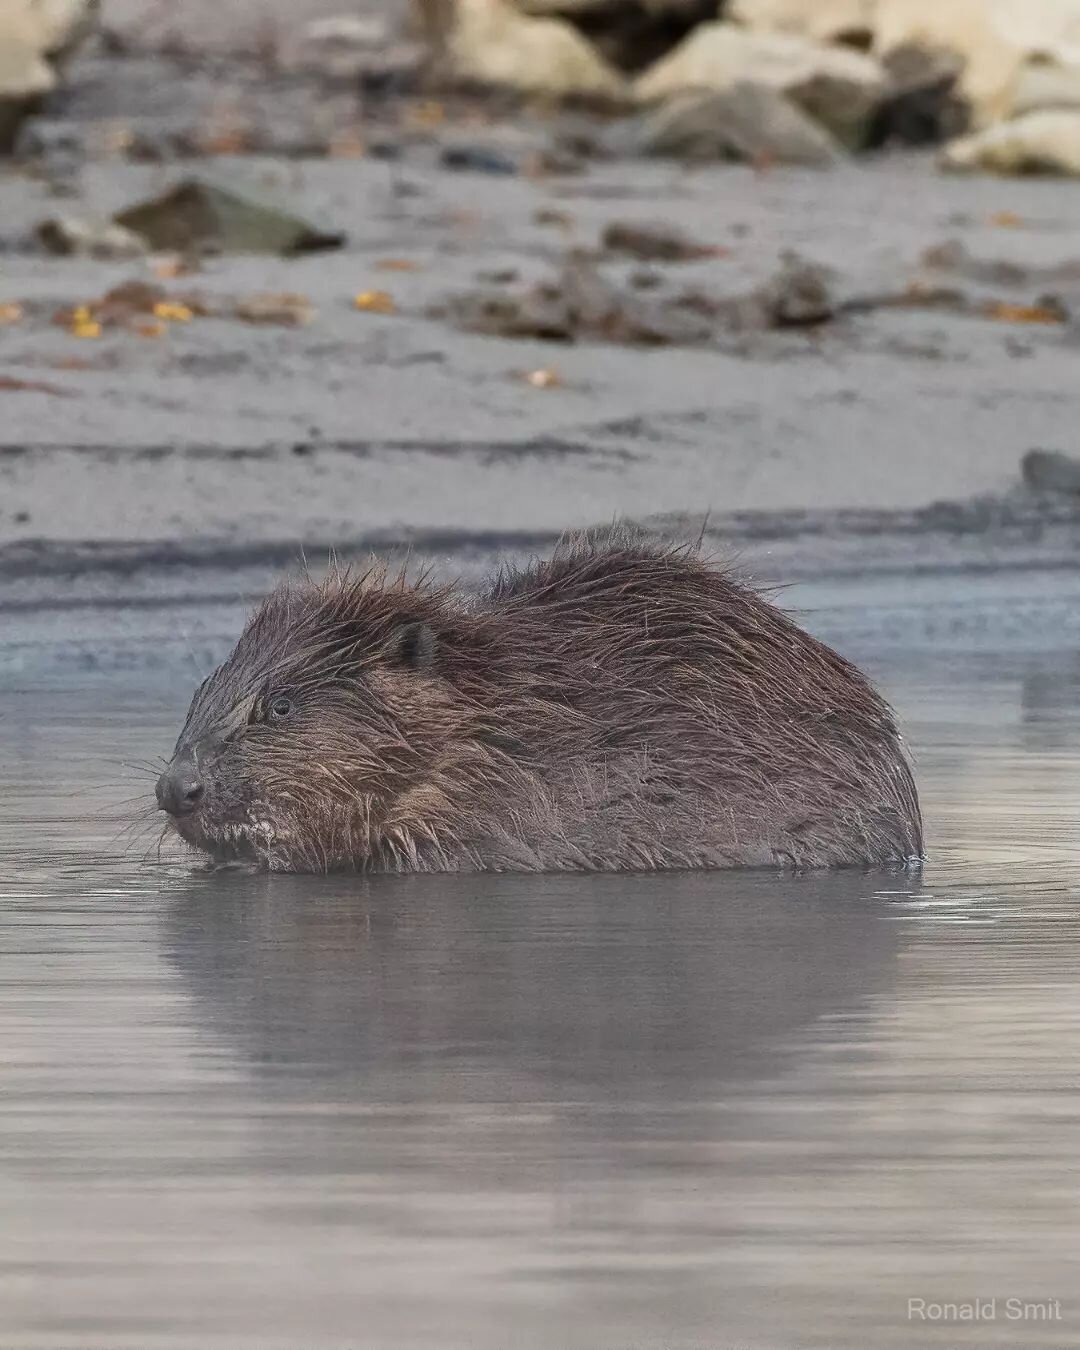 Finally I spotted one!
Beavers are relatively common in the Netherlands. But I have had a couple trips were I tried to find one, but did not succeed. Then finally last week, early in the morning, I saw one swimming to land and then nibbling on some t